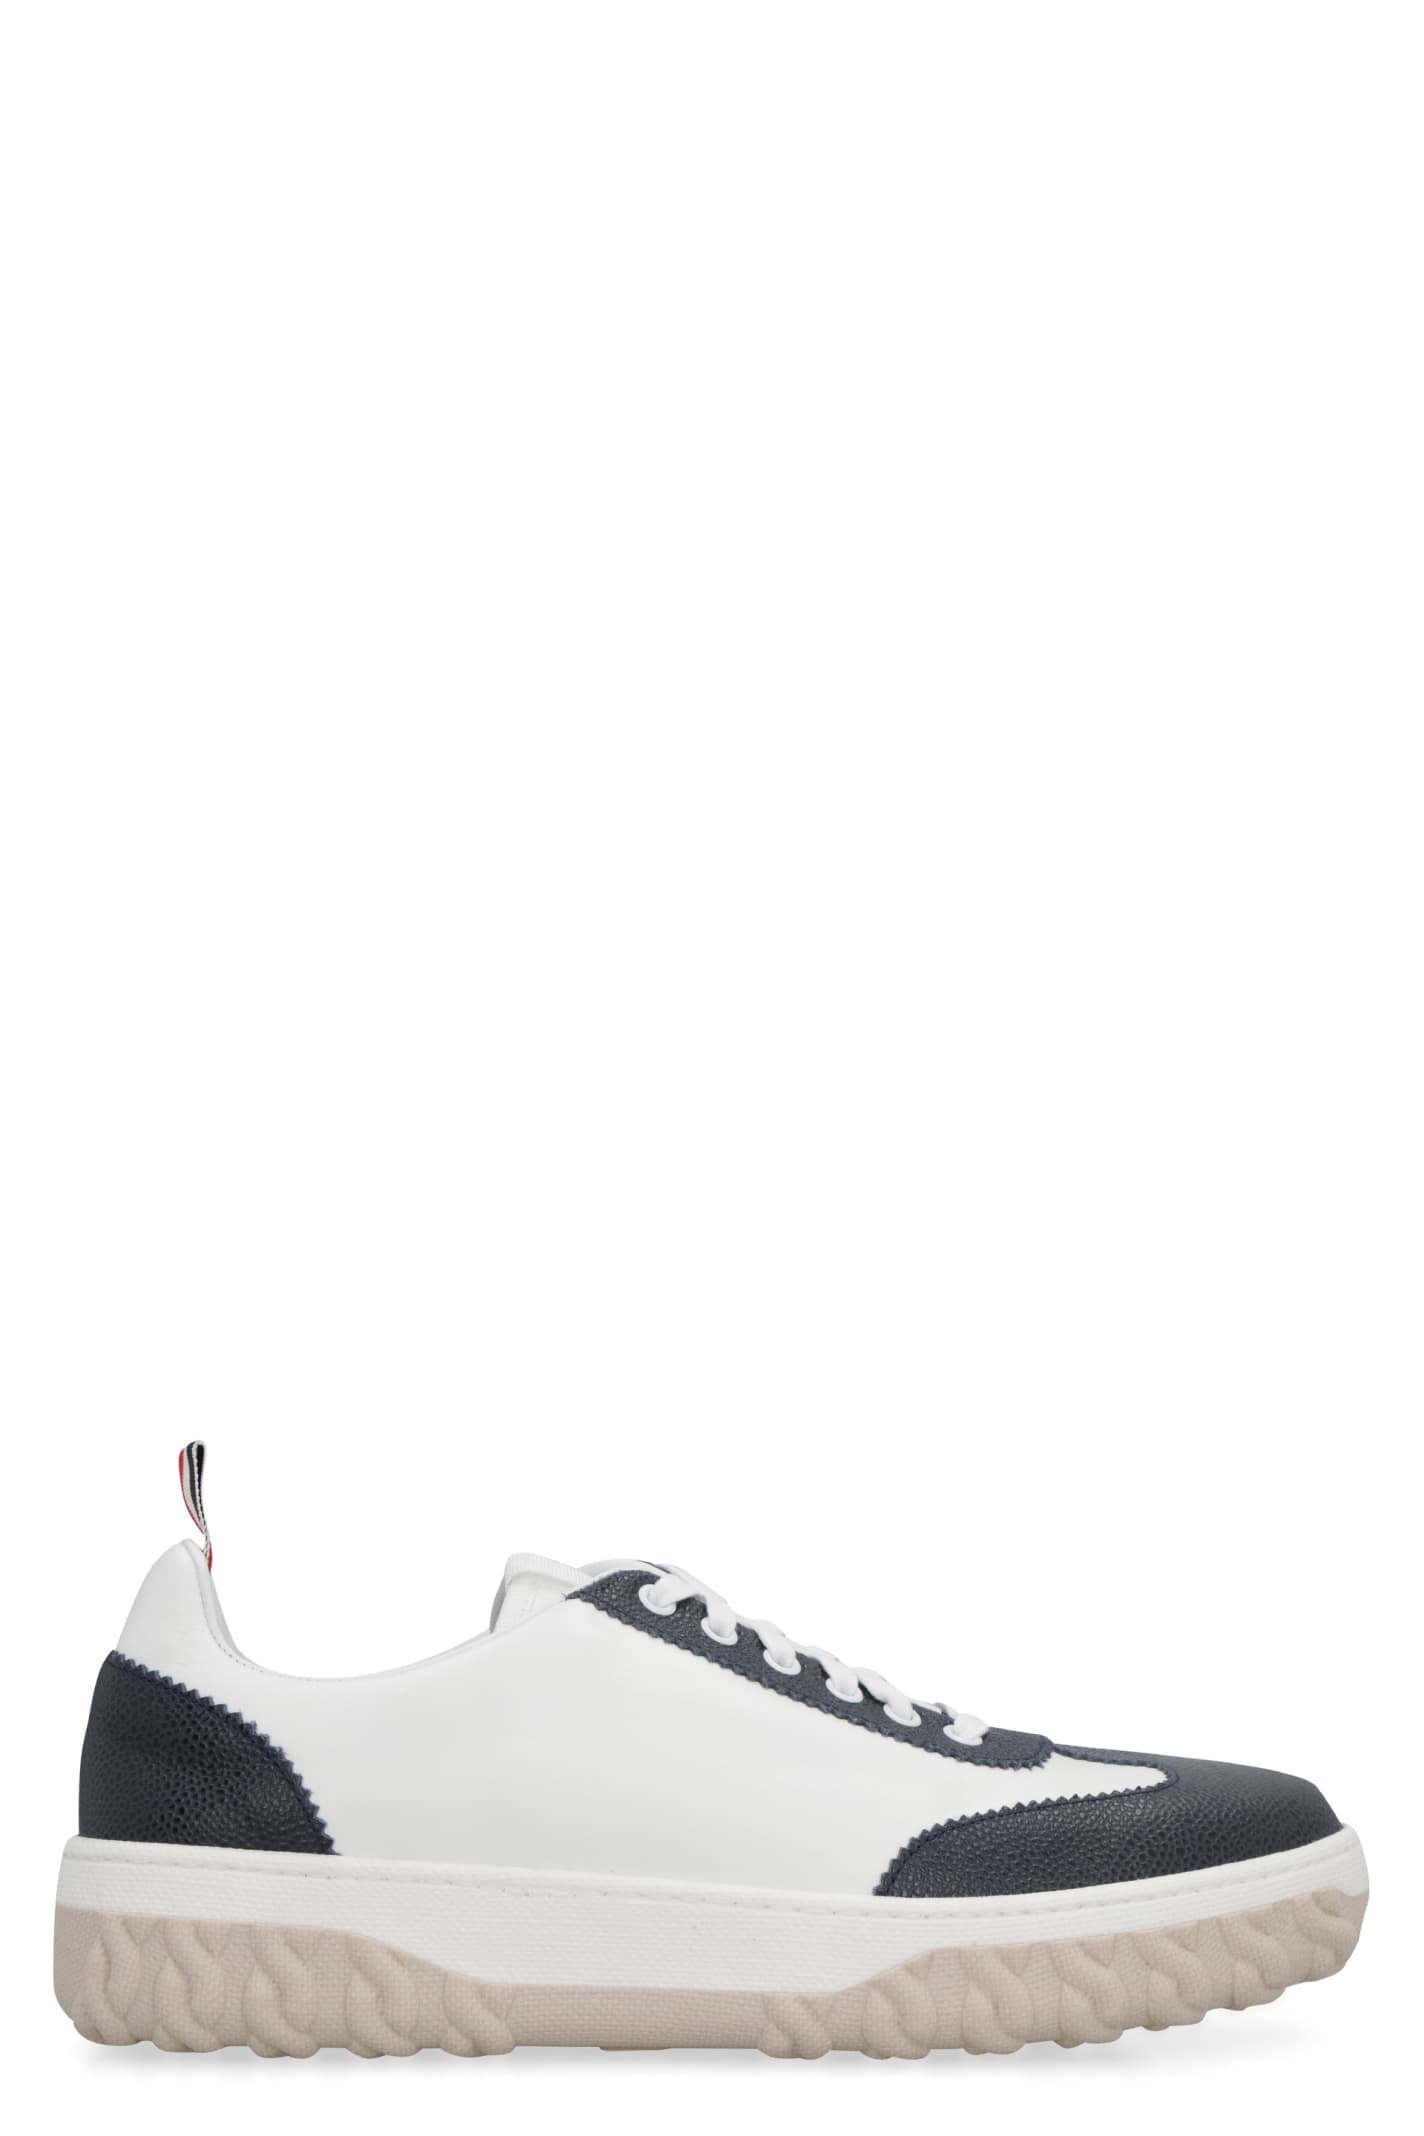 THOM BROWNE COURT LEATHER LOW-TOP SNEAKERS